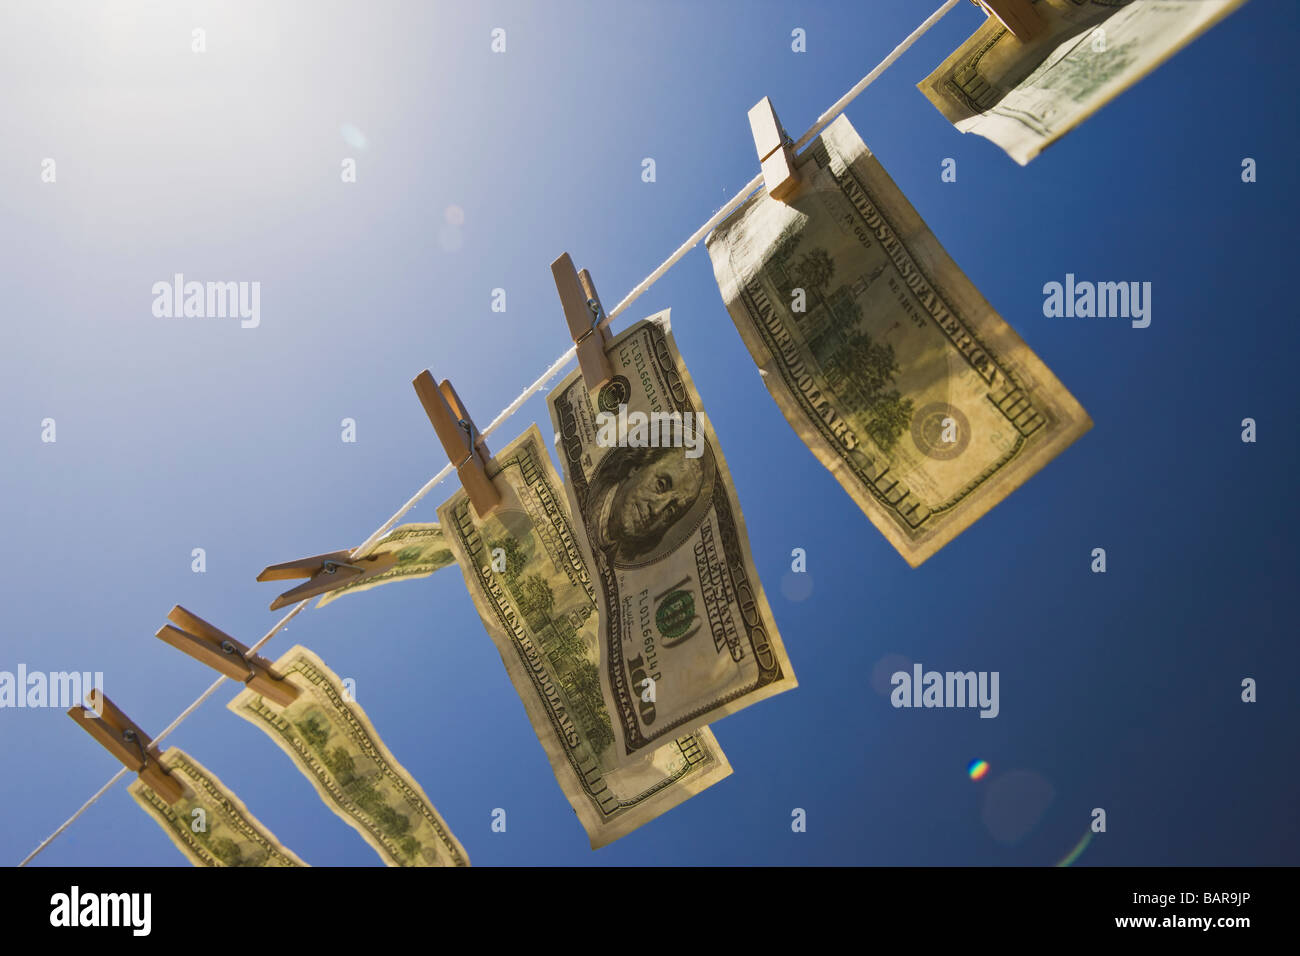 Money Laundering - Dollars: $100 dollar bills drying in the wind under a deep blue sky with intentional lens flare. Stock Photo